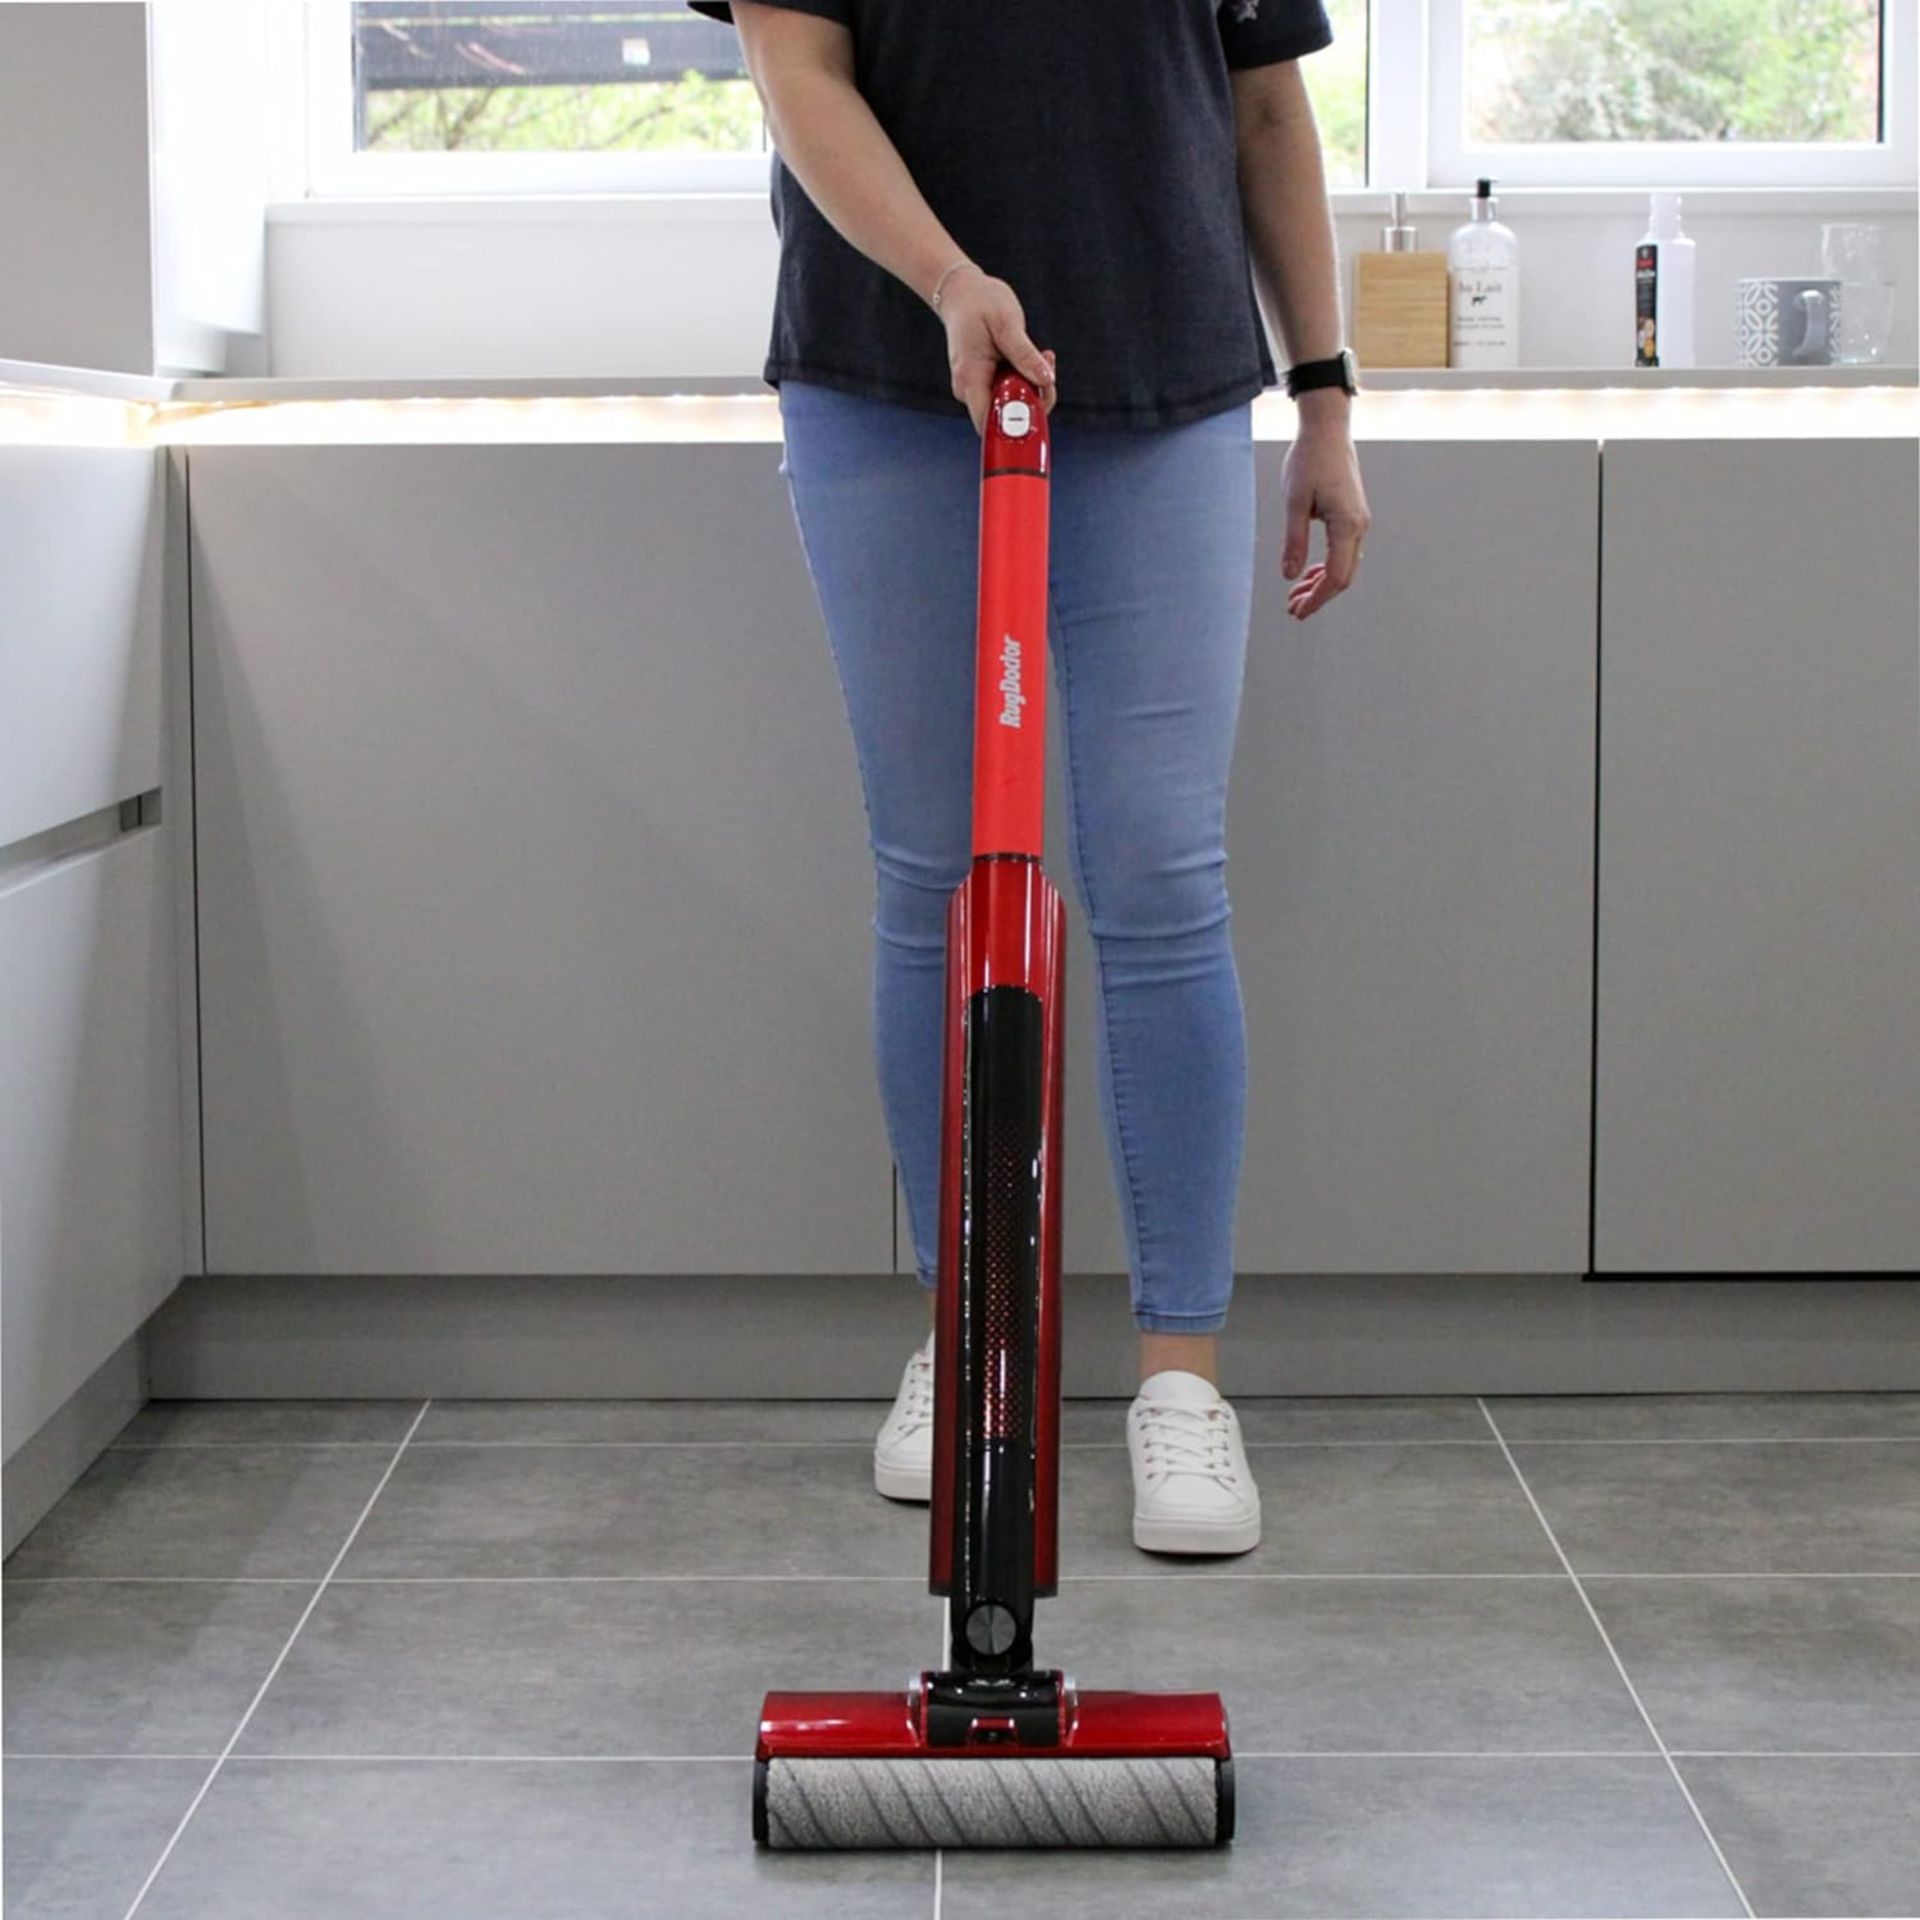 BRAND NEW RUG DOCTOR CORDLESS HARD FLOOR CLEANER WITH 6L OF CLEANING SOLUTION (SA0223)